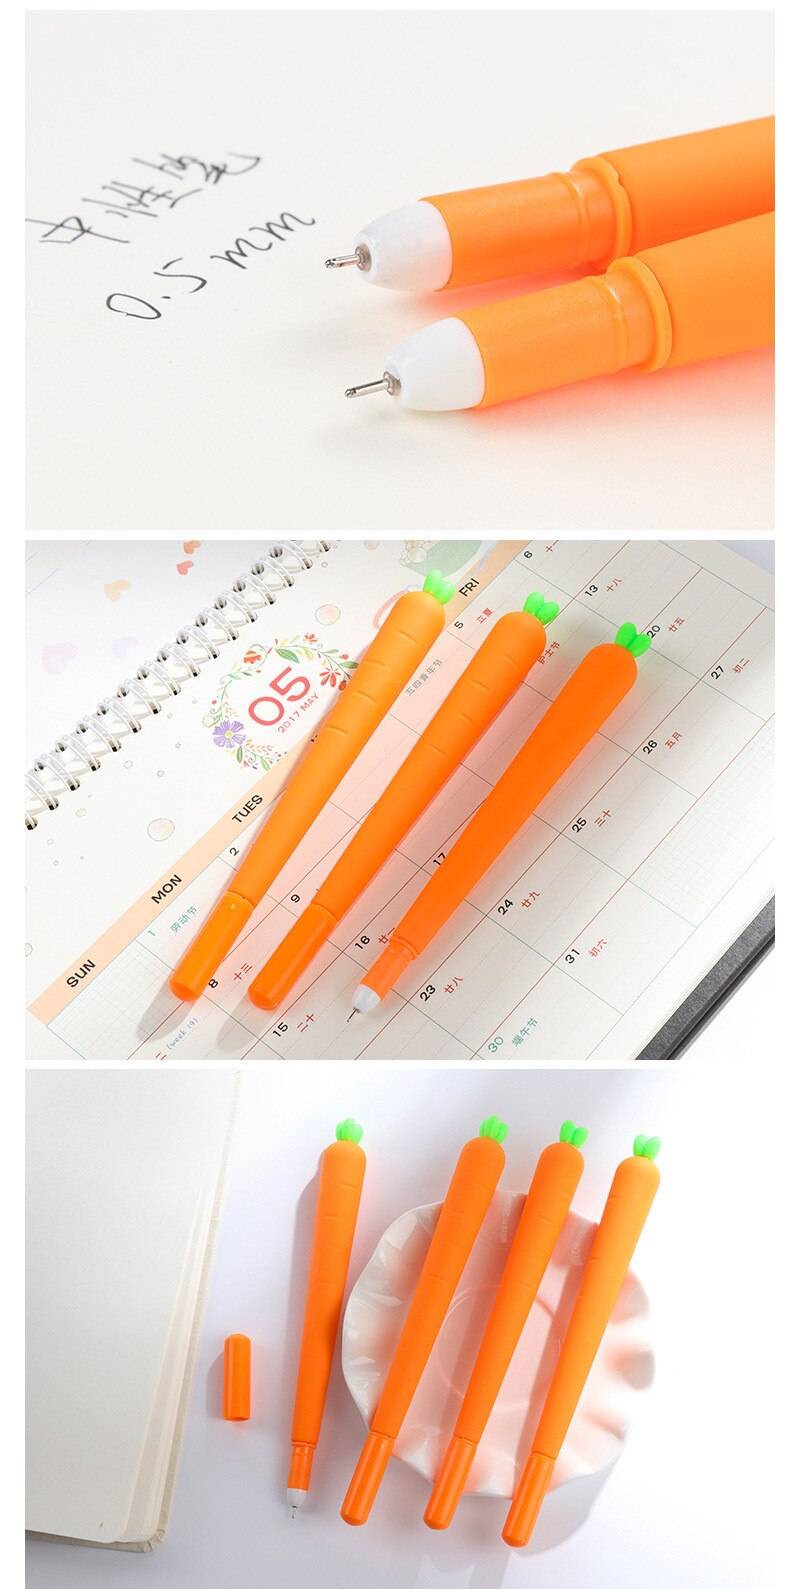 Cute Carrot Shape Gel Pens - Kawaii Stop - Carrot, Cute, Gel Pen, Gift, Kawaii, Kids, Lifelike, Office, Pen, Pens &amp; Pencils, School, Signing, Silicone, Stationary &amp; More, Stationery, Student, Supply, Writing